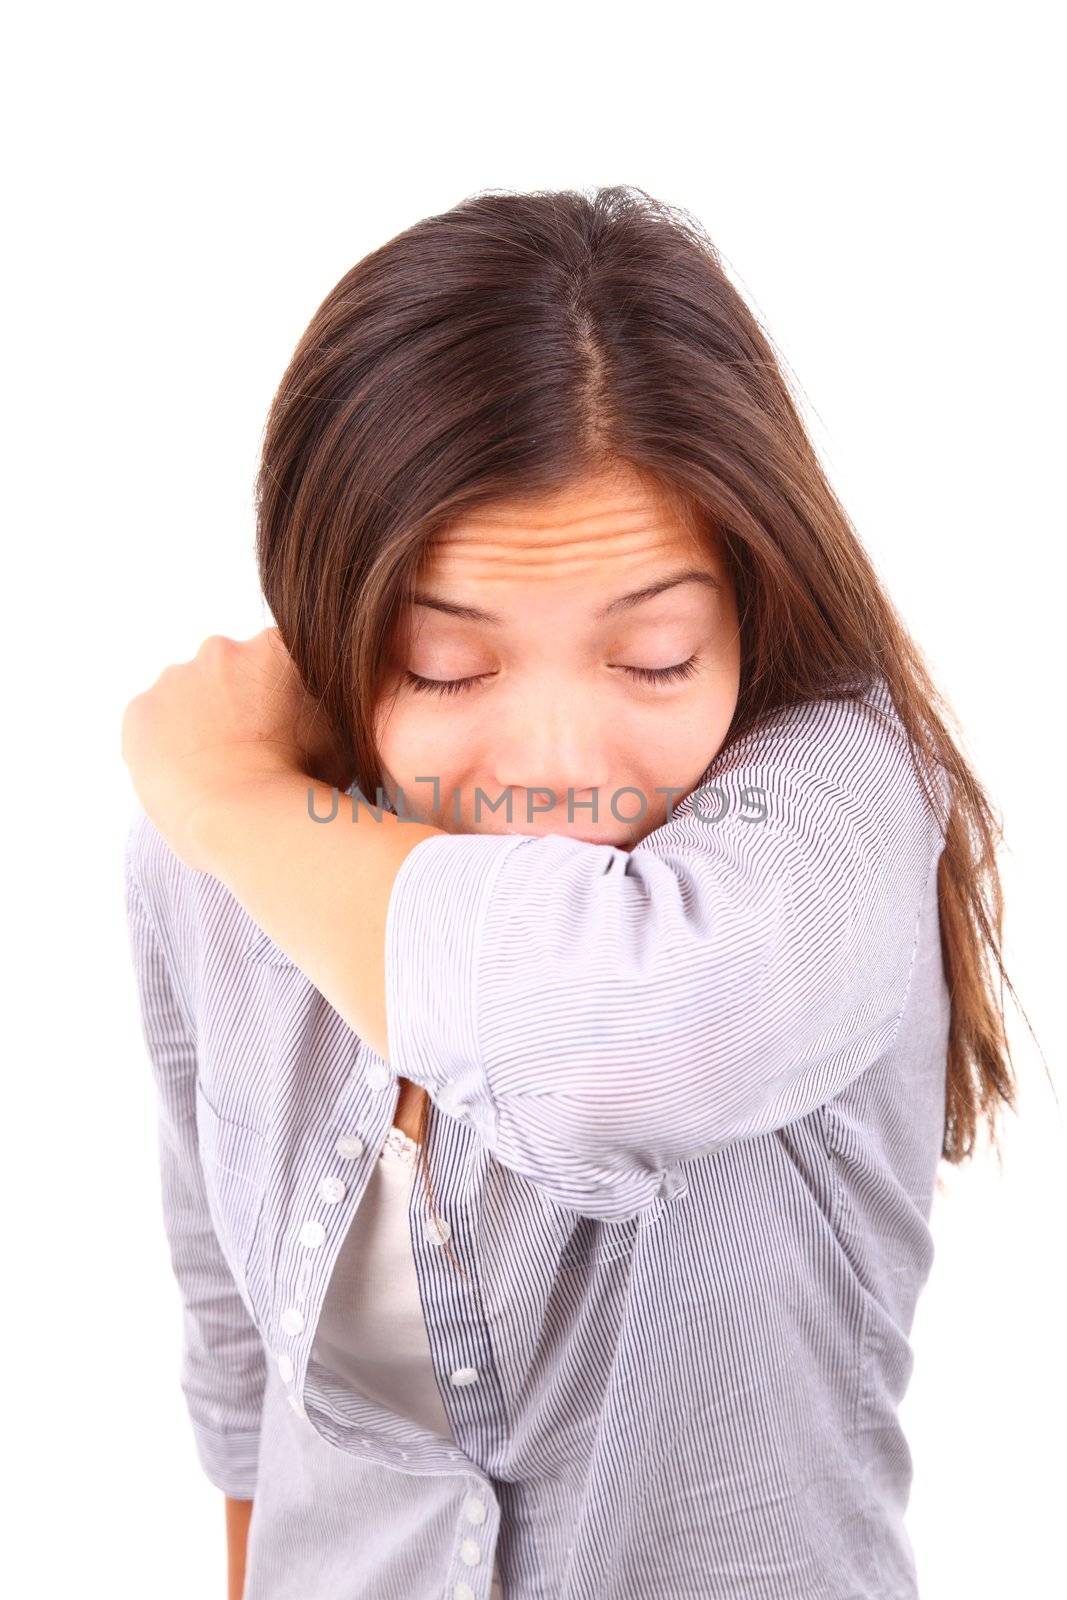 Woman having the flu and sneezing on her sleeve in the elbow crook of her arm. Isolated on white background.